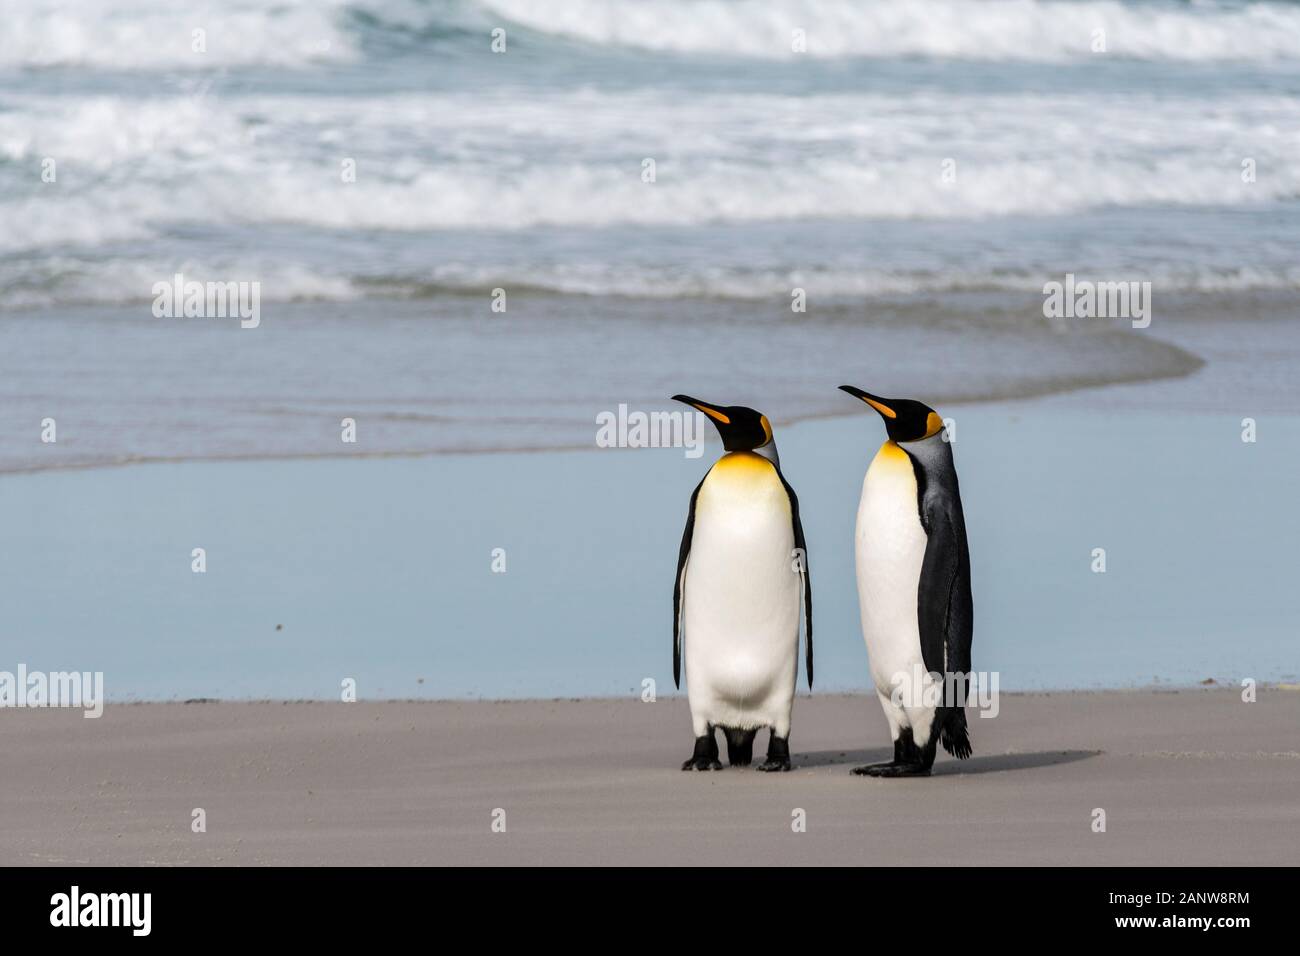 Pair of King Penguins, Aptenodytes patagonicus, on the beach at the Neck, Saunders Island, Falkland Islands, British Overseas Territory Stock Photo